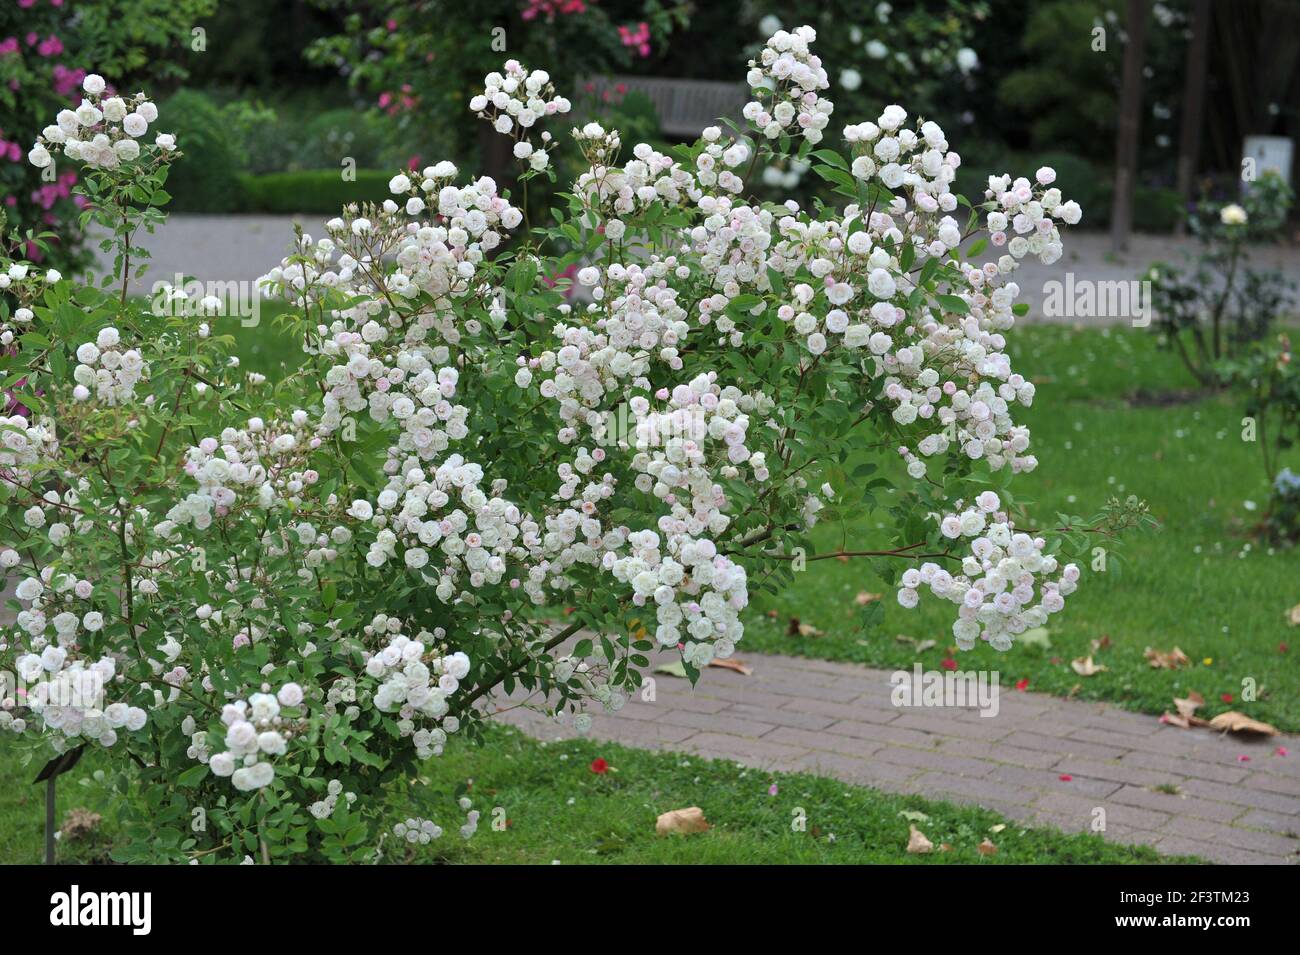 White with a pink undertones semi-double Rambler rose (Rosa) Blushing Bride  blooms in a garden in June Stock Photo - Alamy